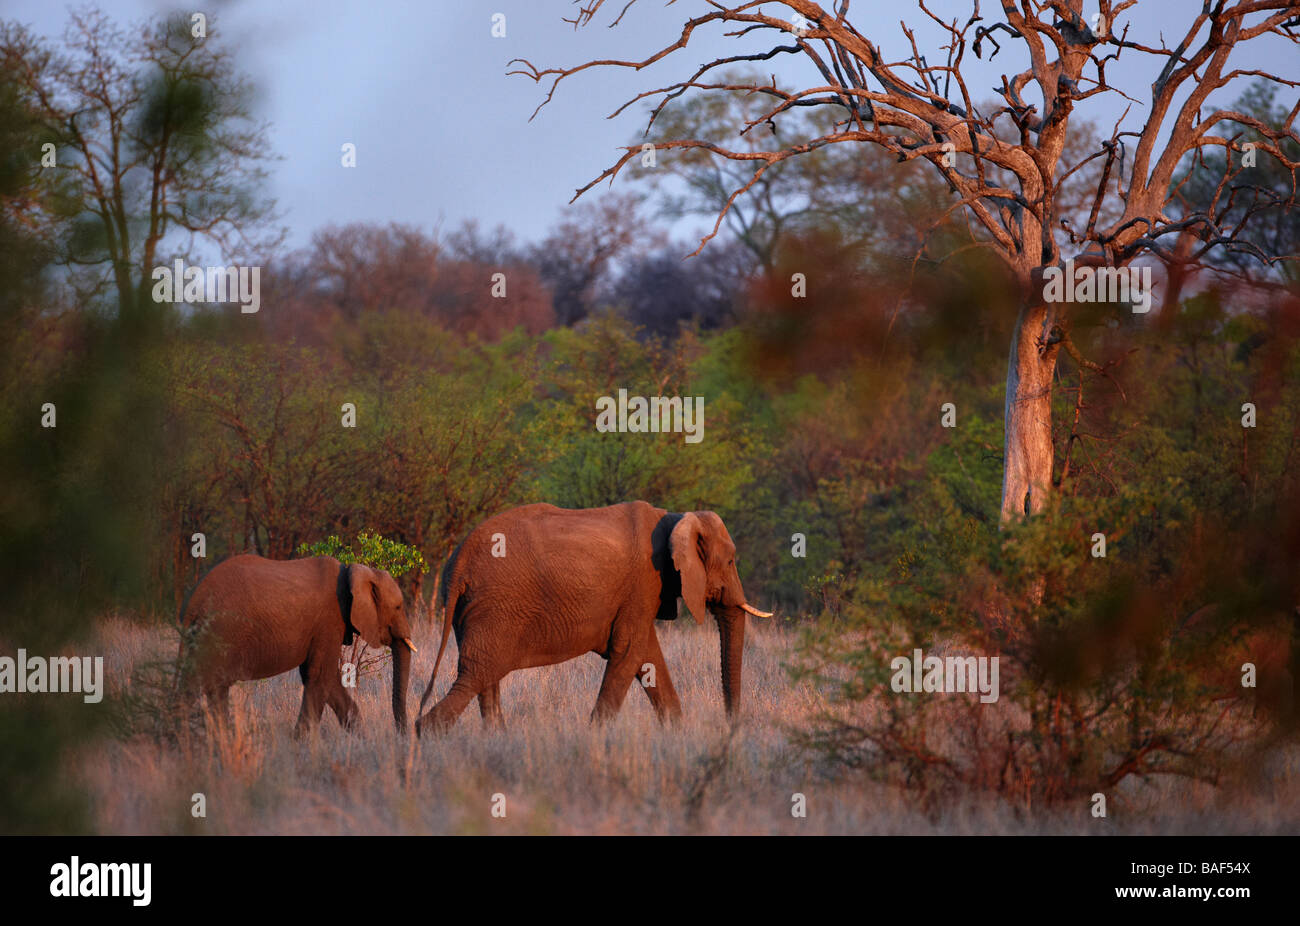 an African elephant with young in the bush at dusk, Kruger National Park, South Africa Stock Photo